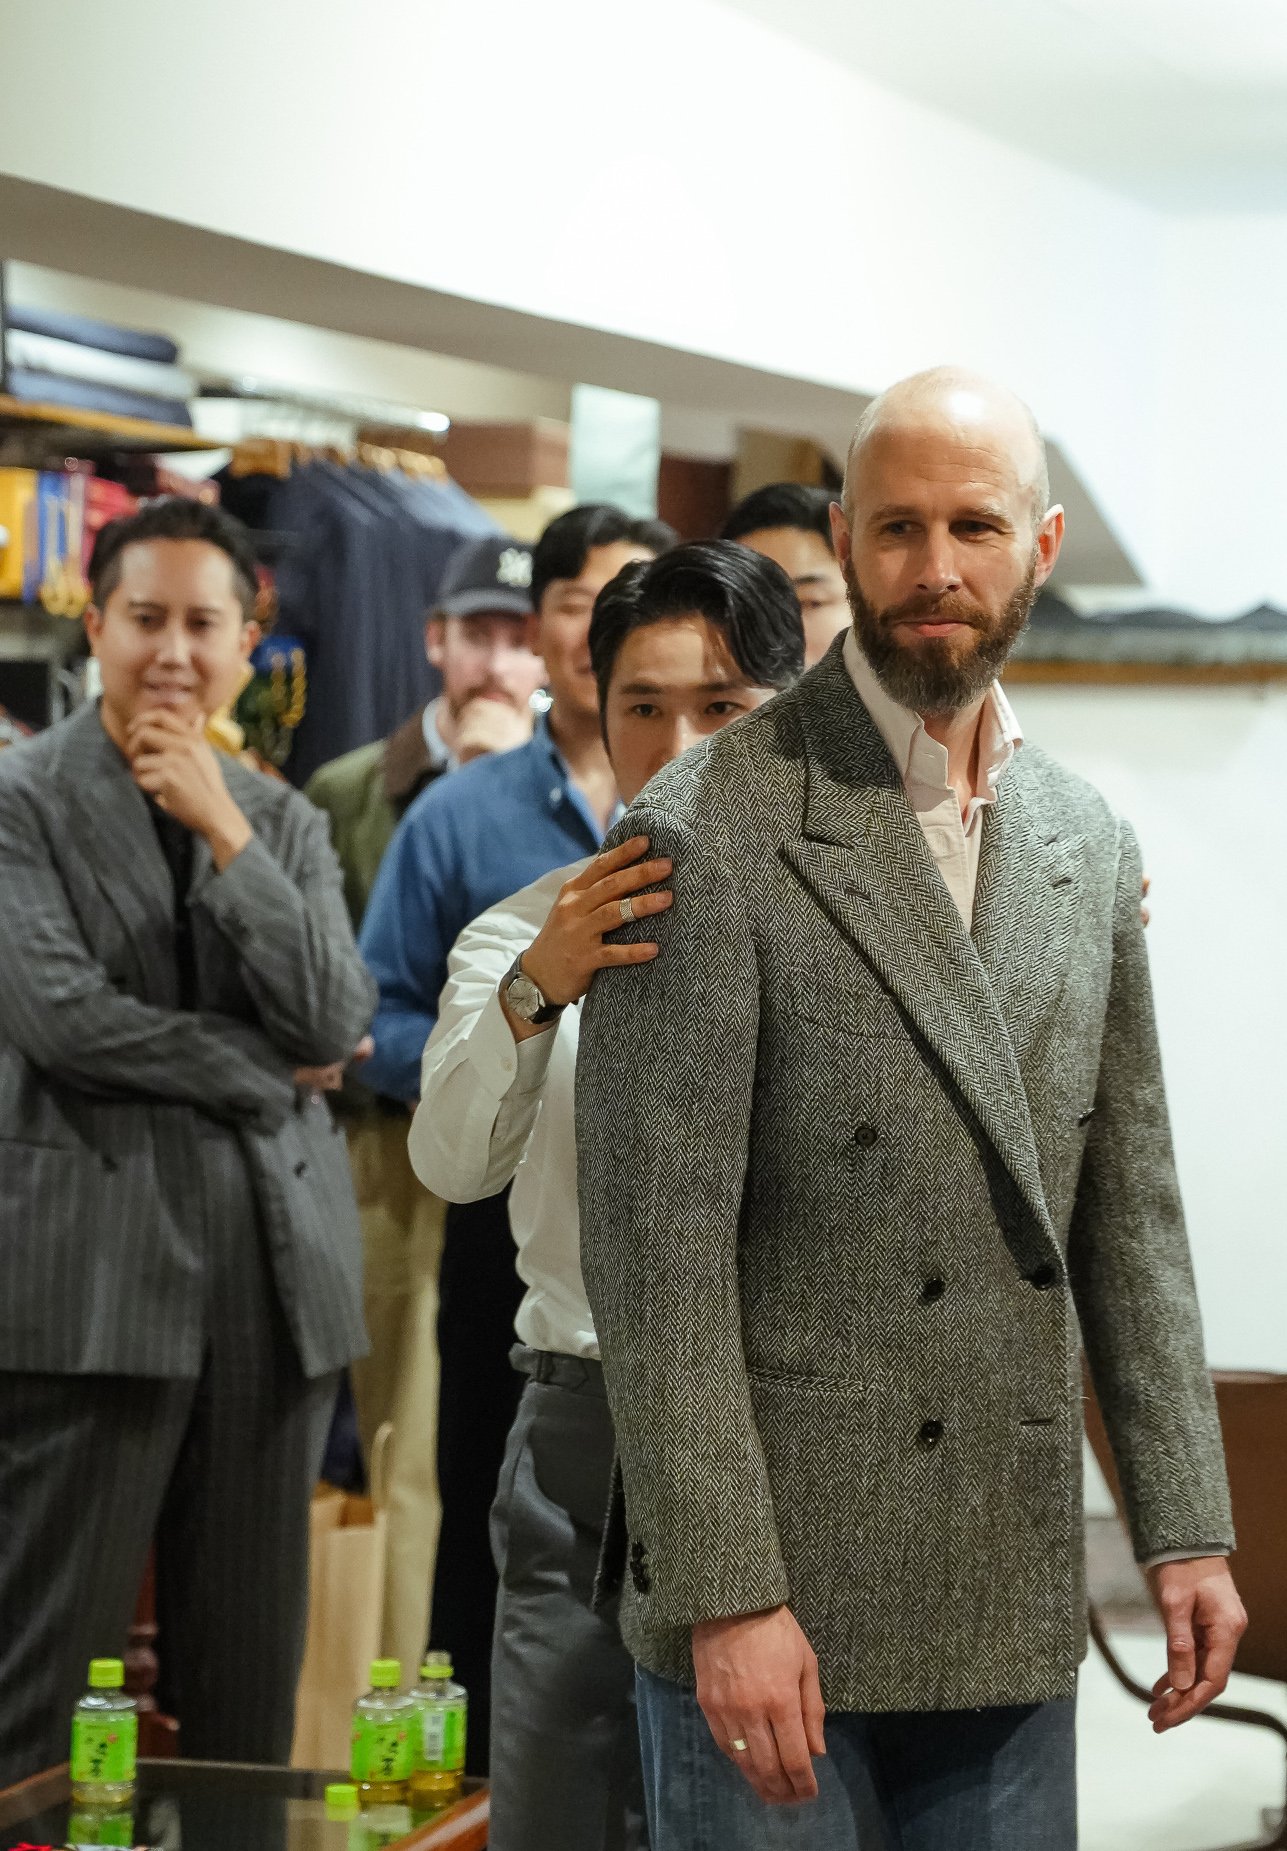 Assisi bespoke tailors, Korea: Fitting a tweed DB – Permanent Style